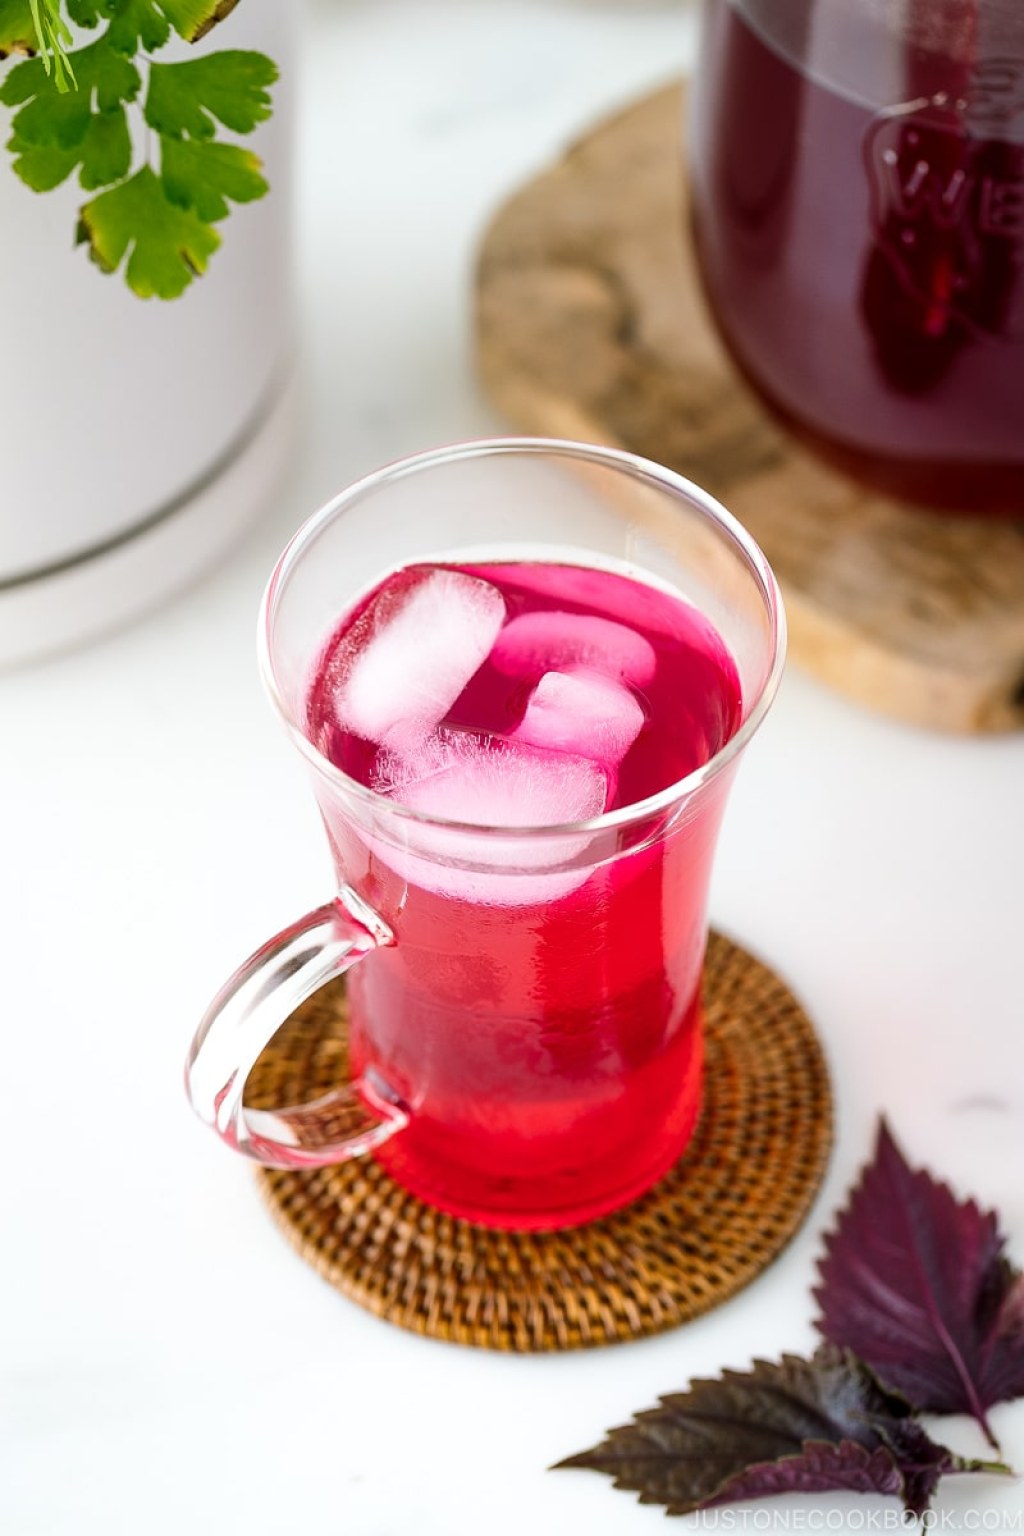 Picture of: Aka Shiso Juice (Red Perilla Juice) 赤紫蘇ジュース • Just One Cookbook